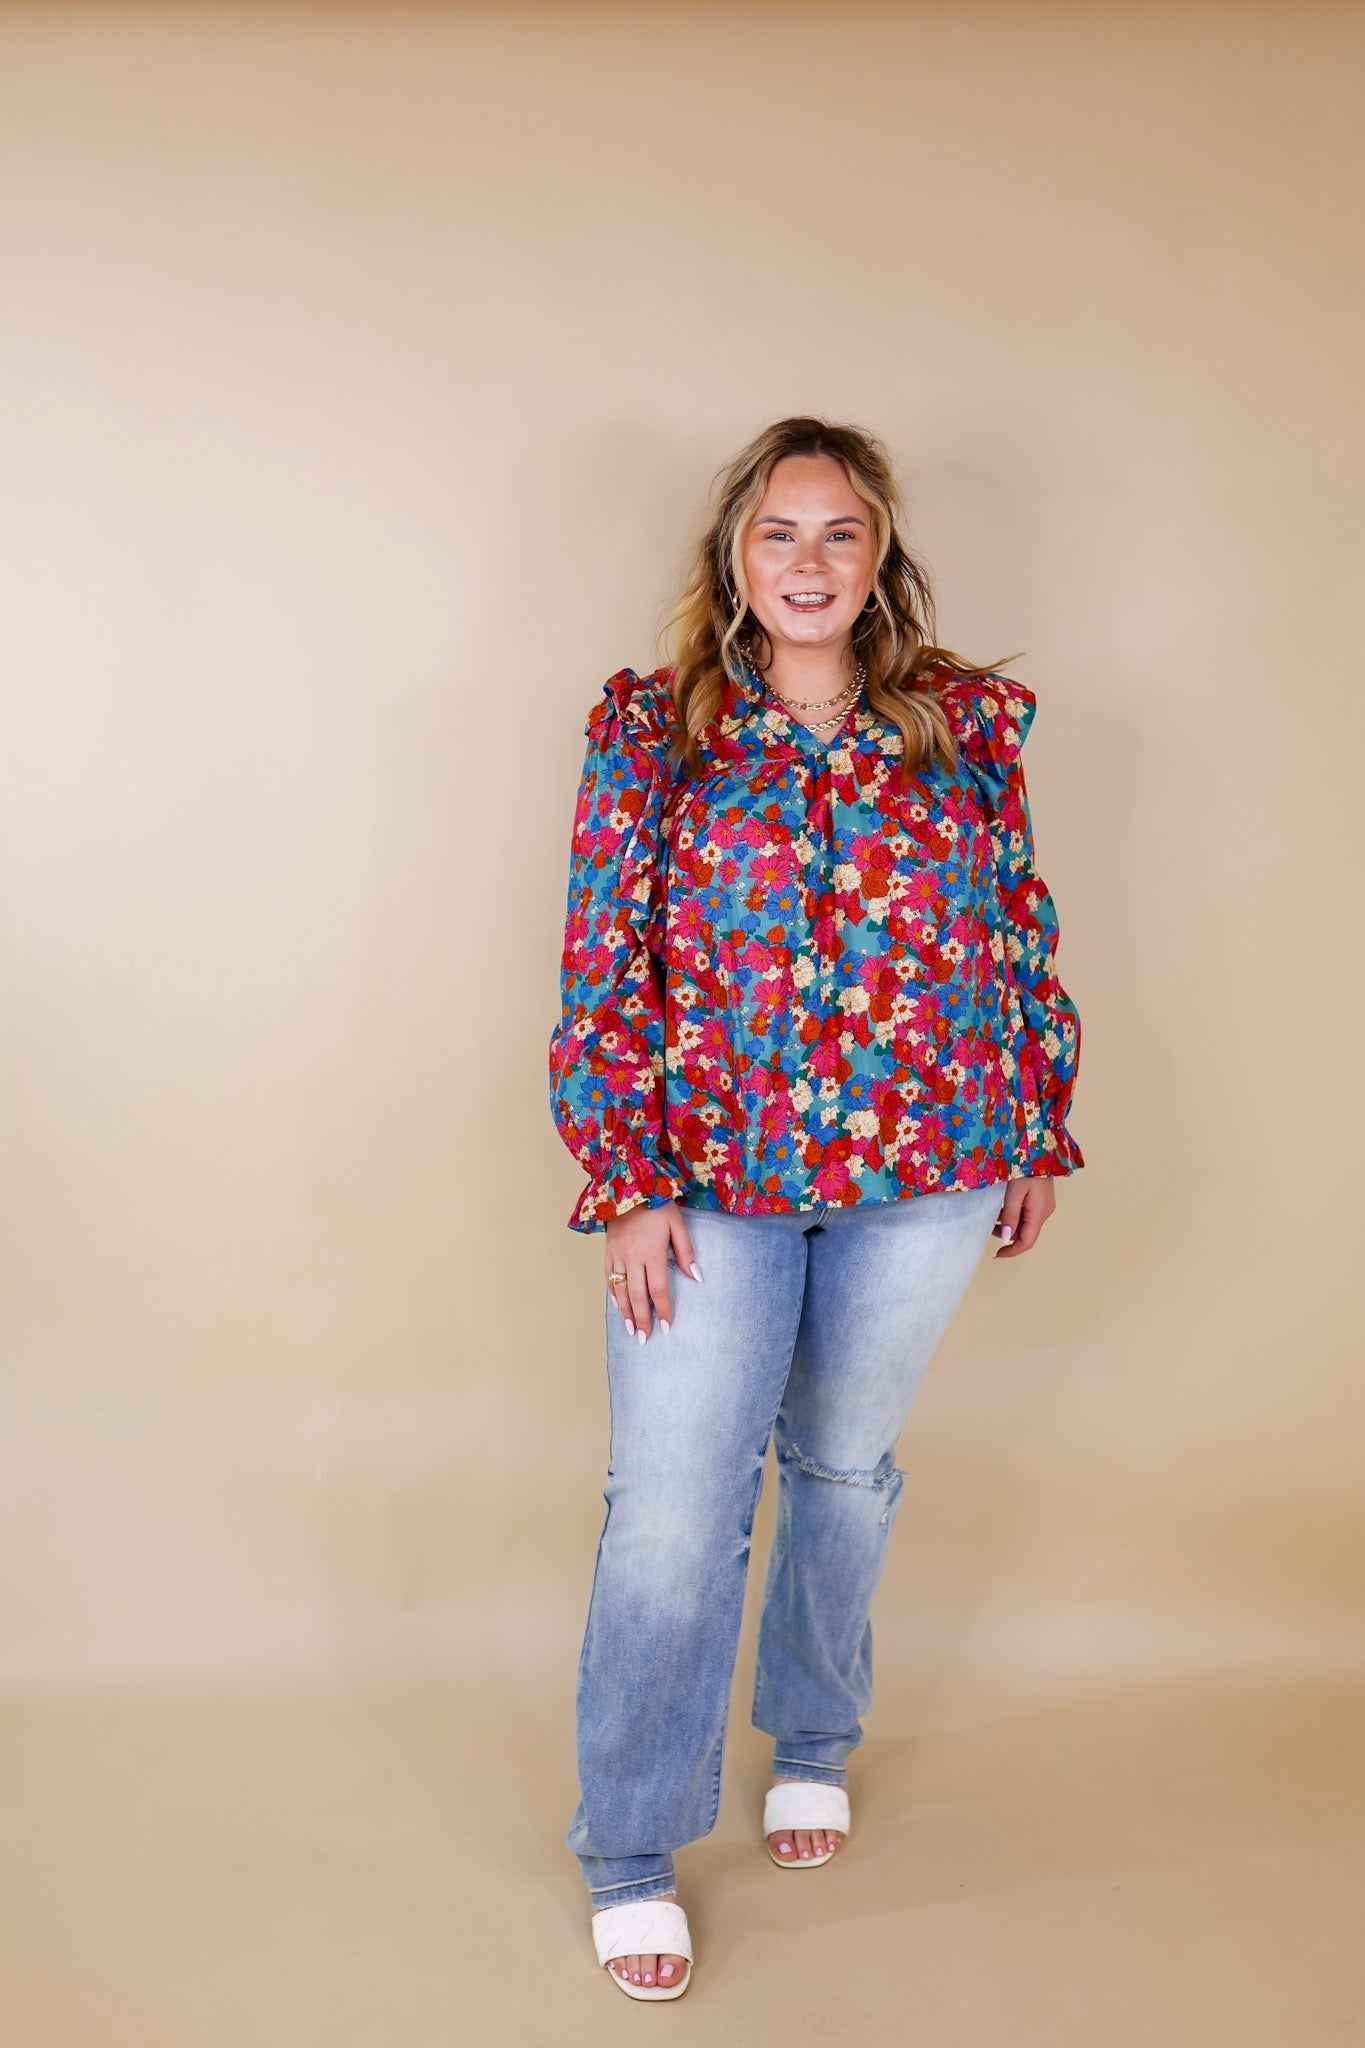 Coffee Perks Floral Ruffle Detail Long Sleeve Top in Turquoise - Giddy Up Glamour Boutique